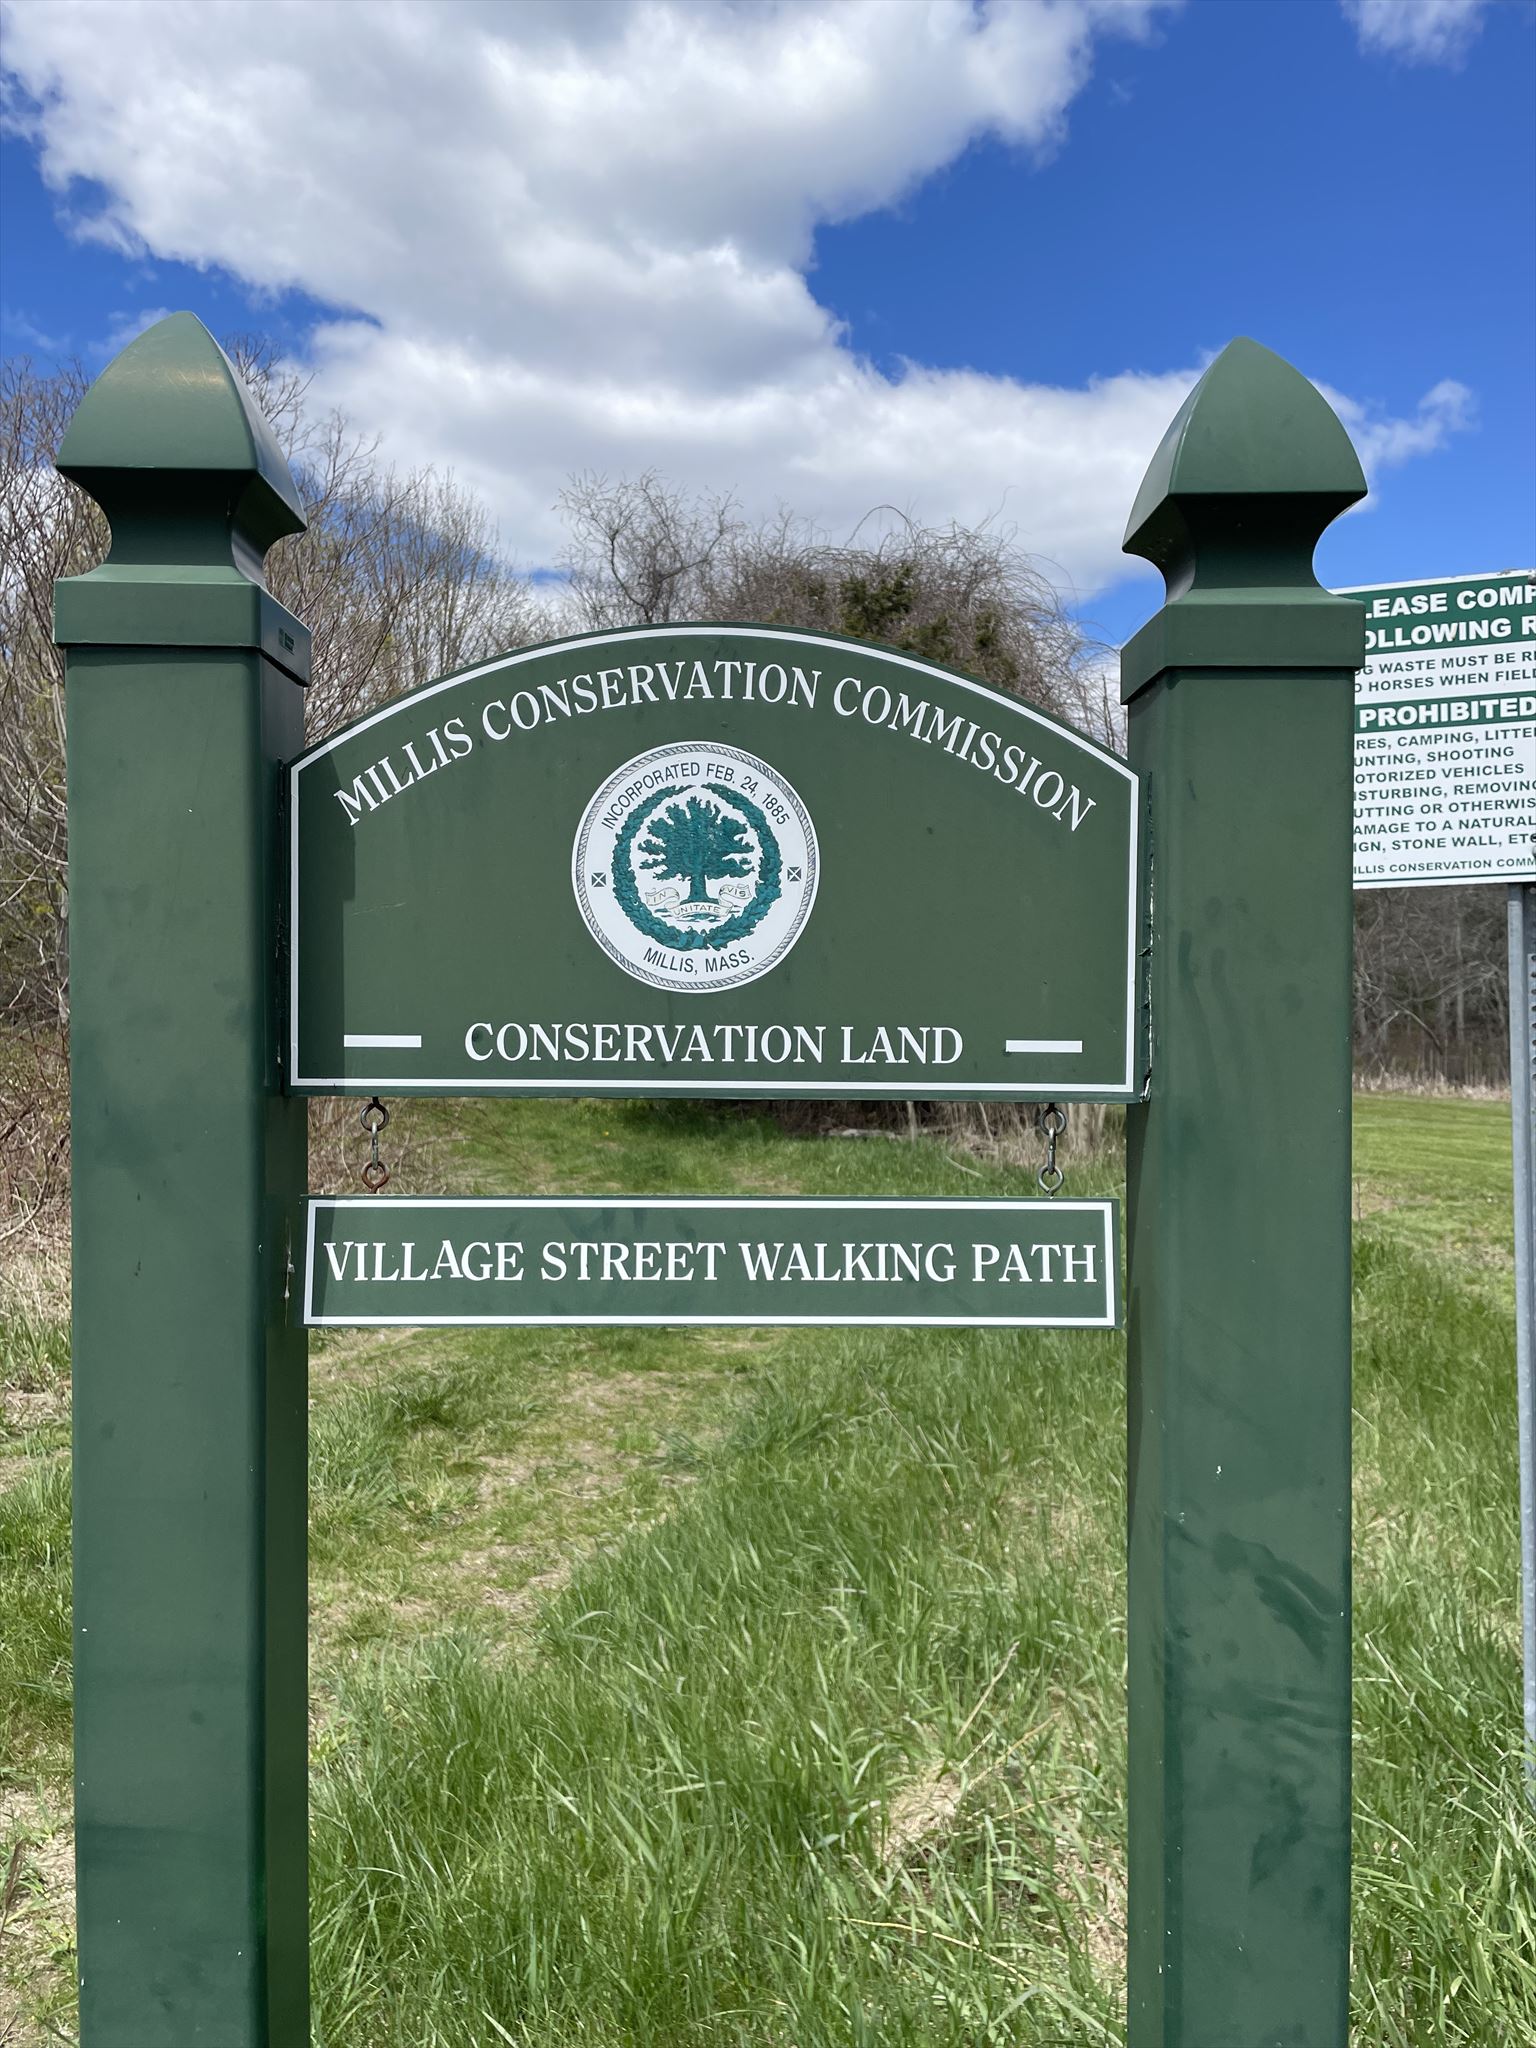 photo of trailhead signage - Millis conservation commission, village street walking path. Printed on green wooden sign. Sign is in a grassy field with trees and a blue cloudy sky in the background.